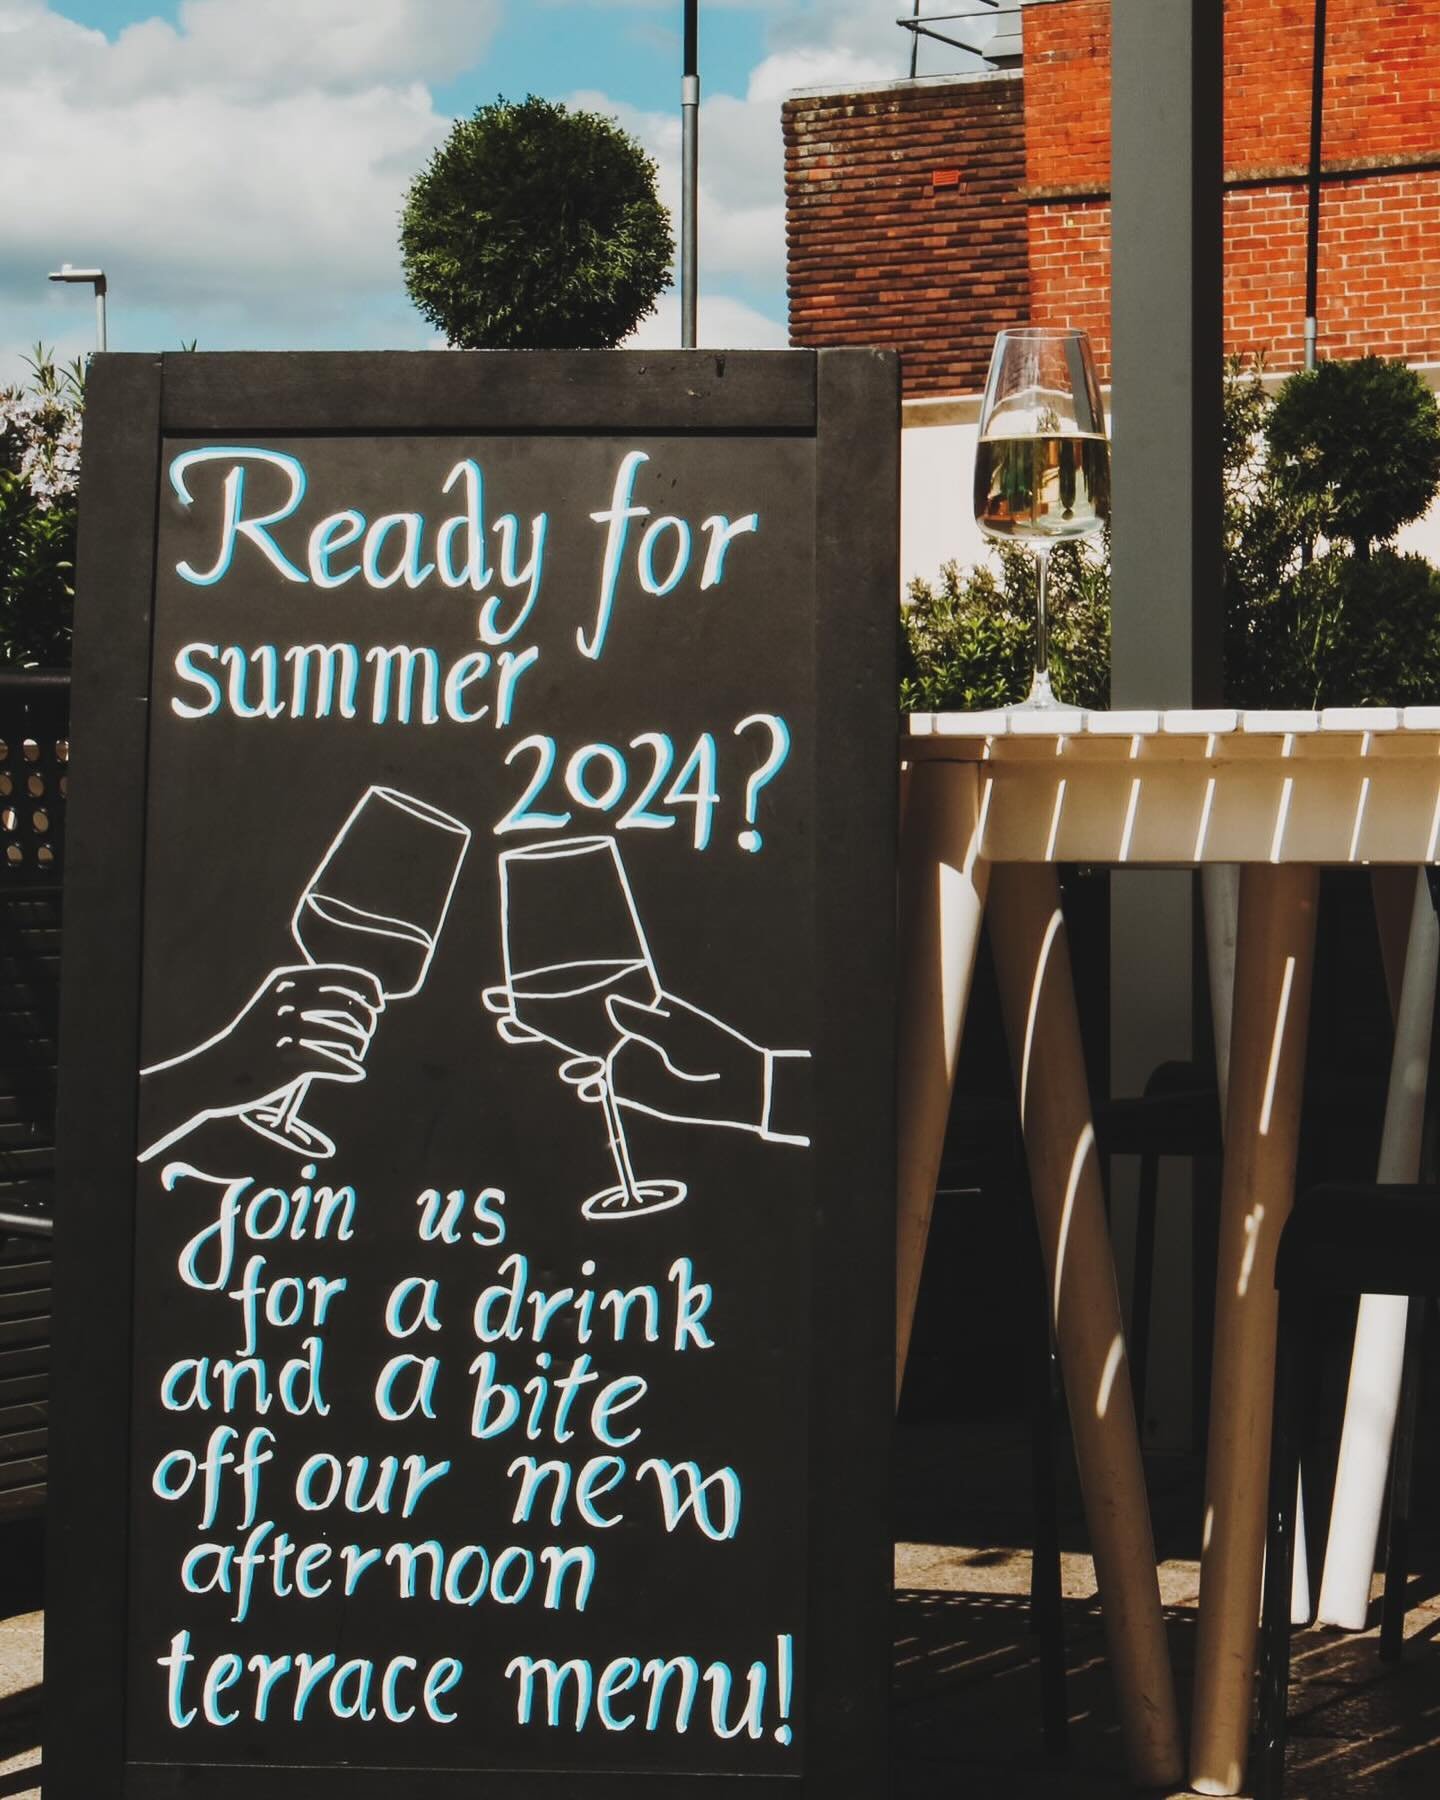 The terrace will be opening this week and that means the start of our new terrace menu. With some great new food and drink additions being served between 3-6pm every Thursday, Friday and Saturday, be sure to check it out! ☀️🤞